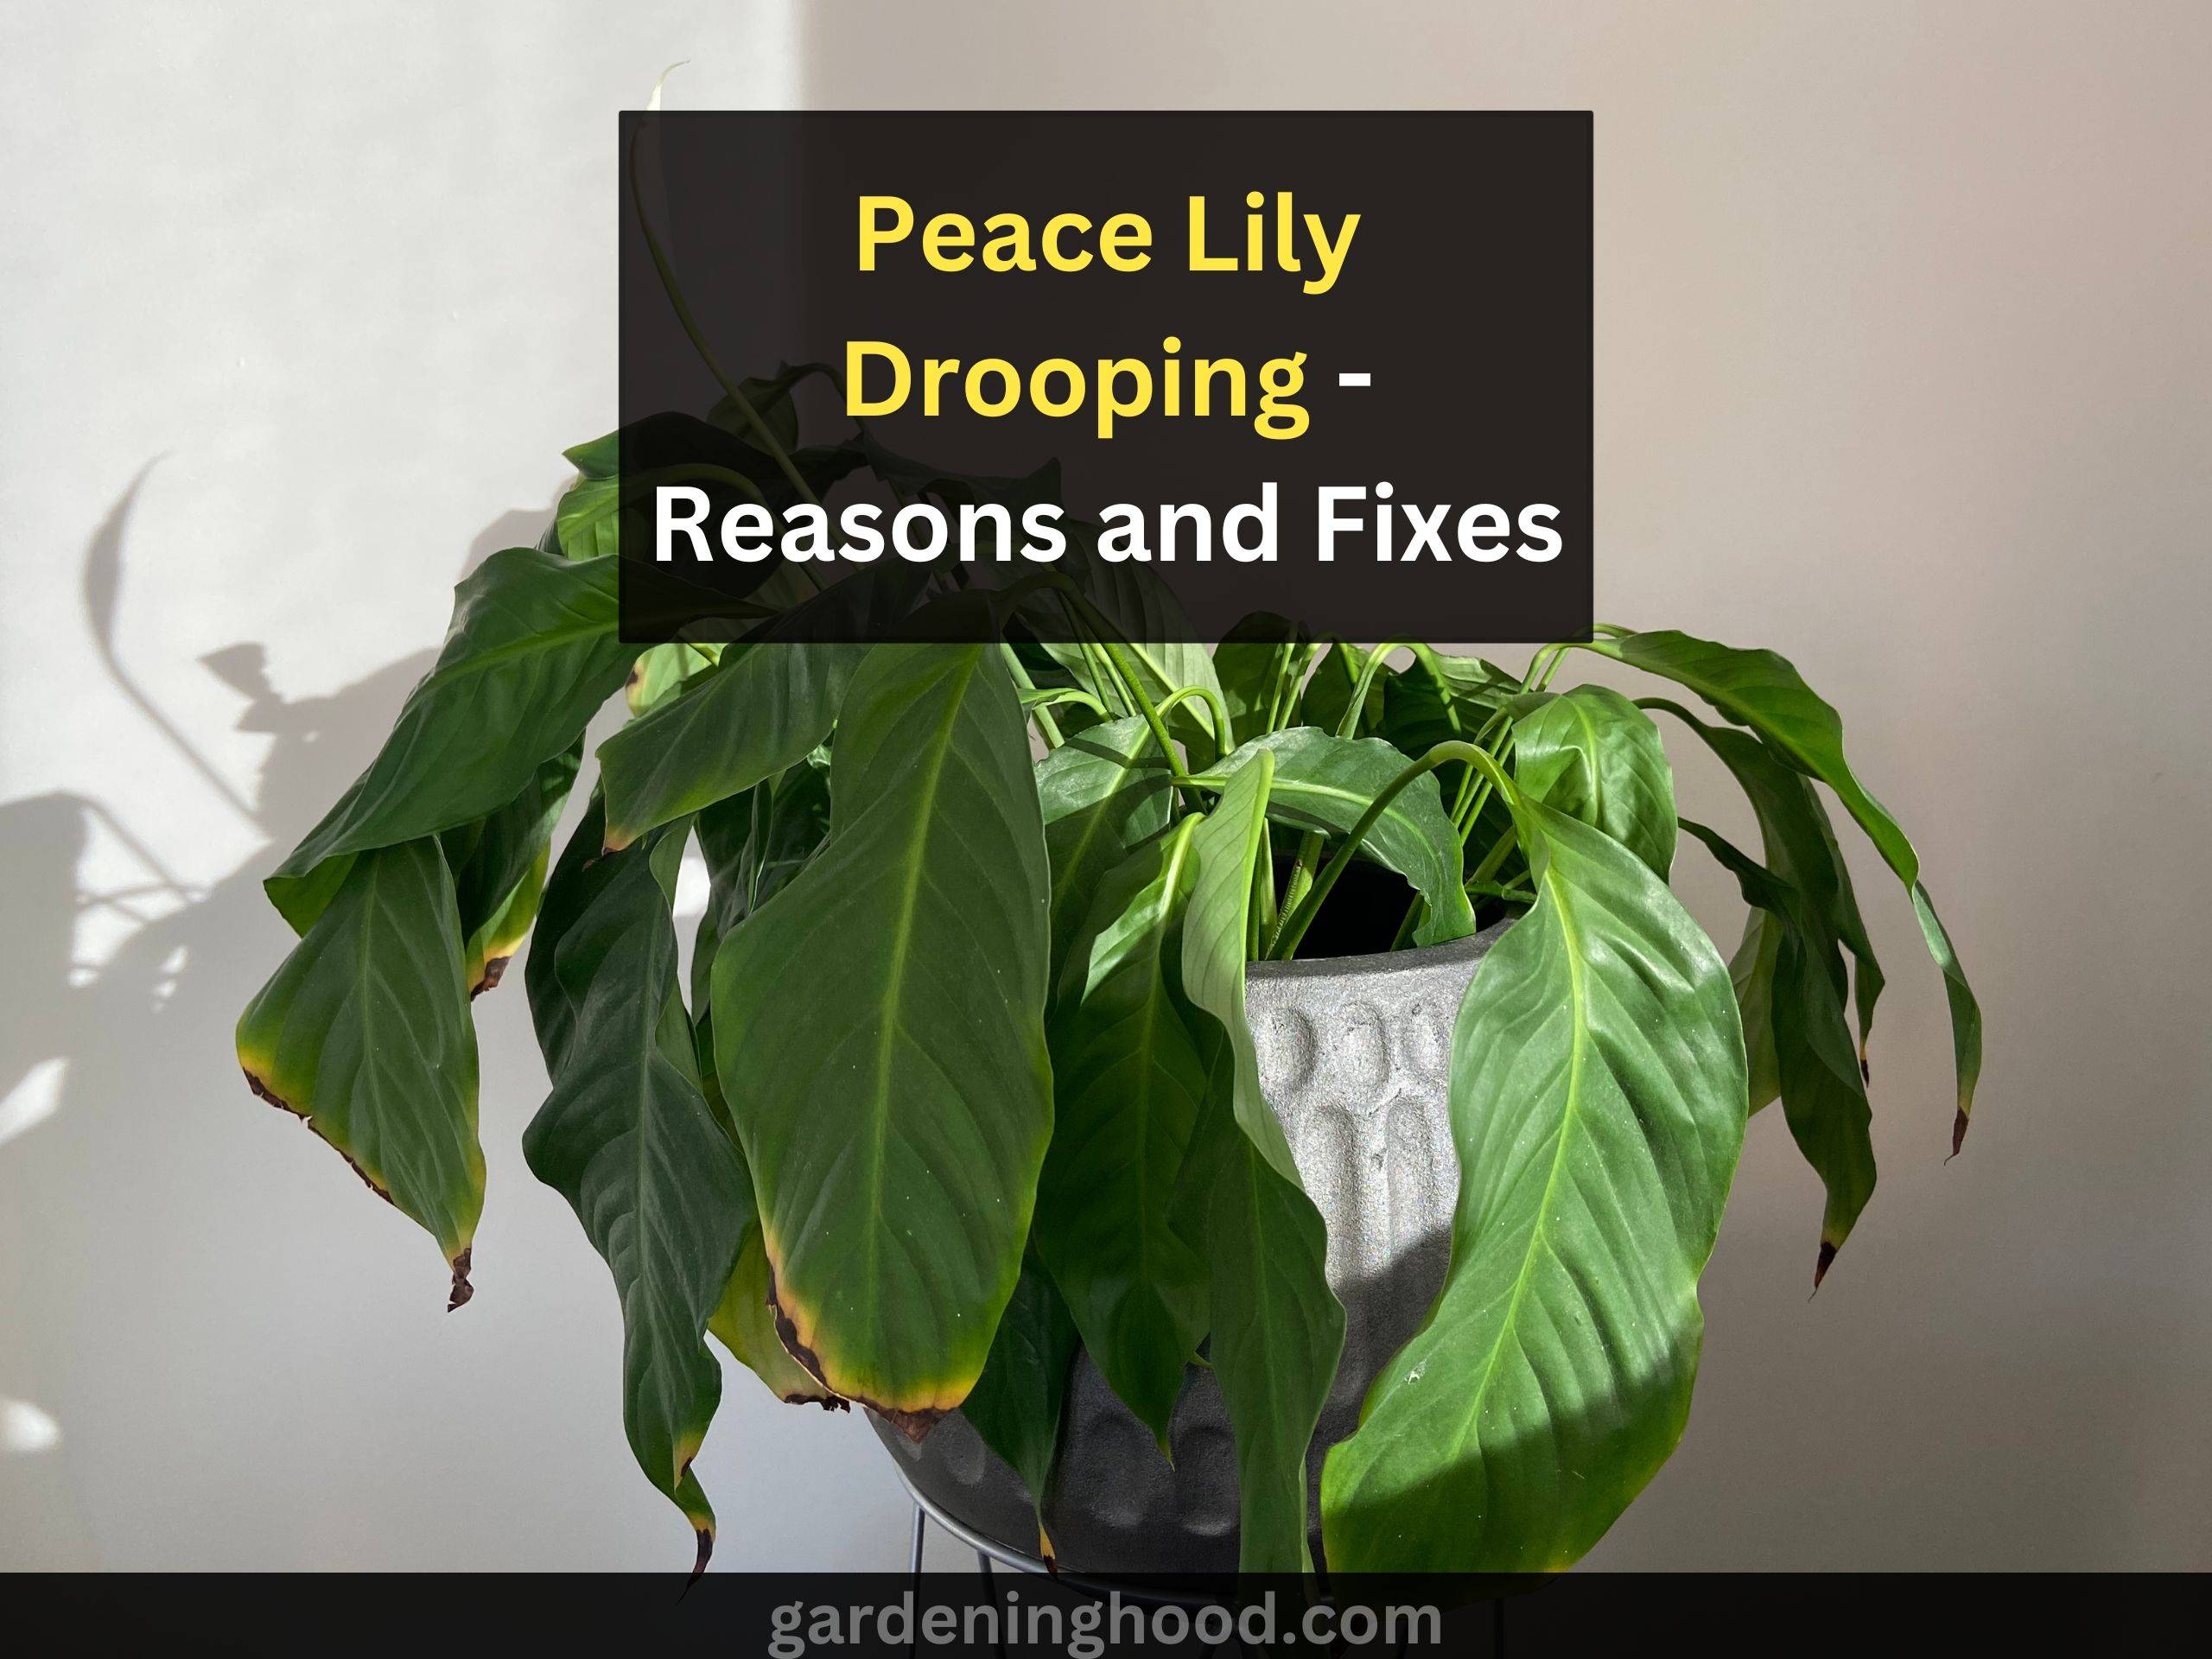 Peace Lily Drooping - Reasons and Fixes for Wilting Peace Lily (Spathiphyllum)